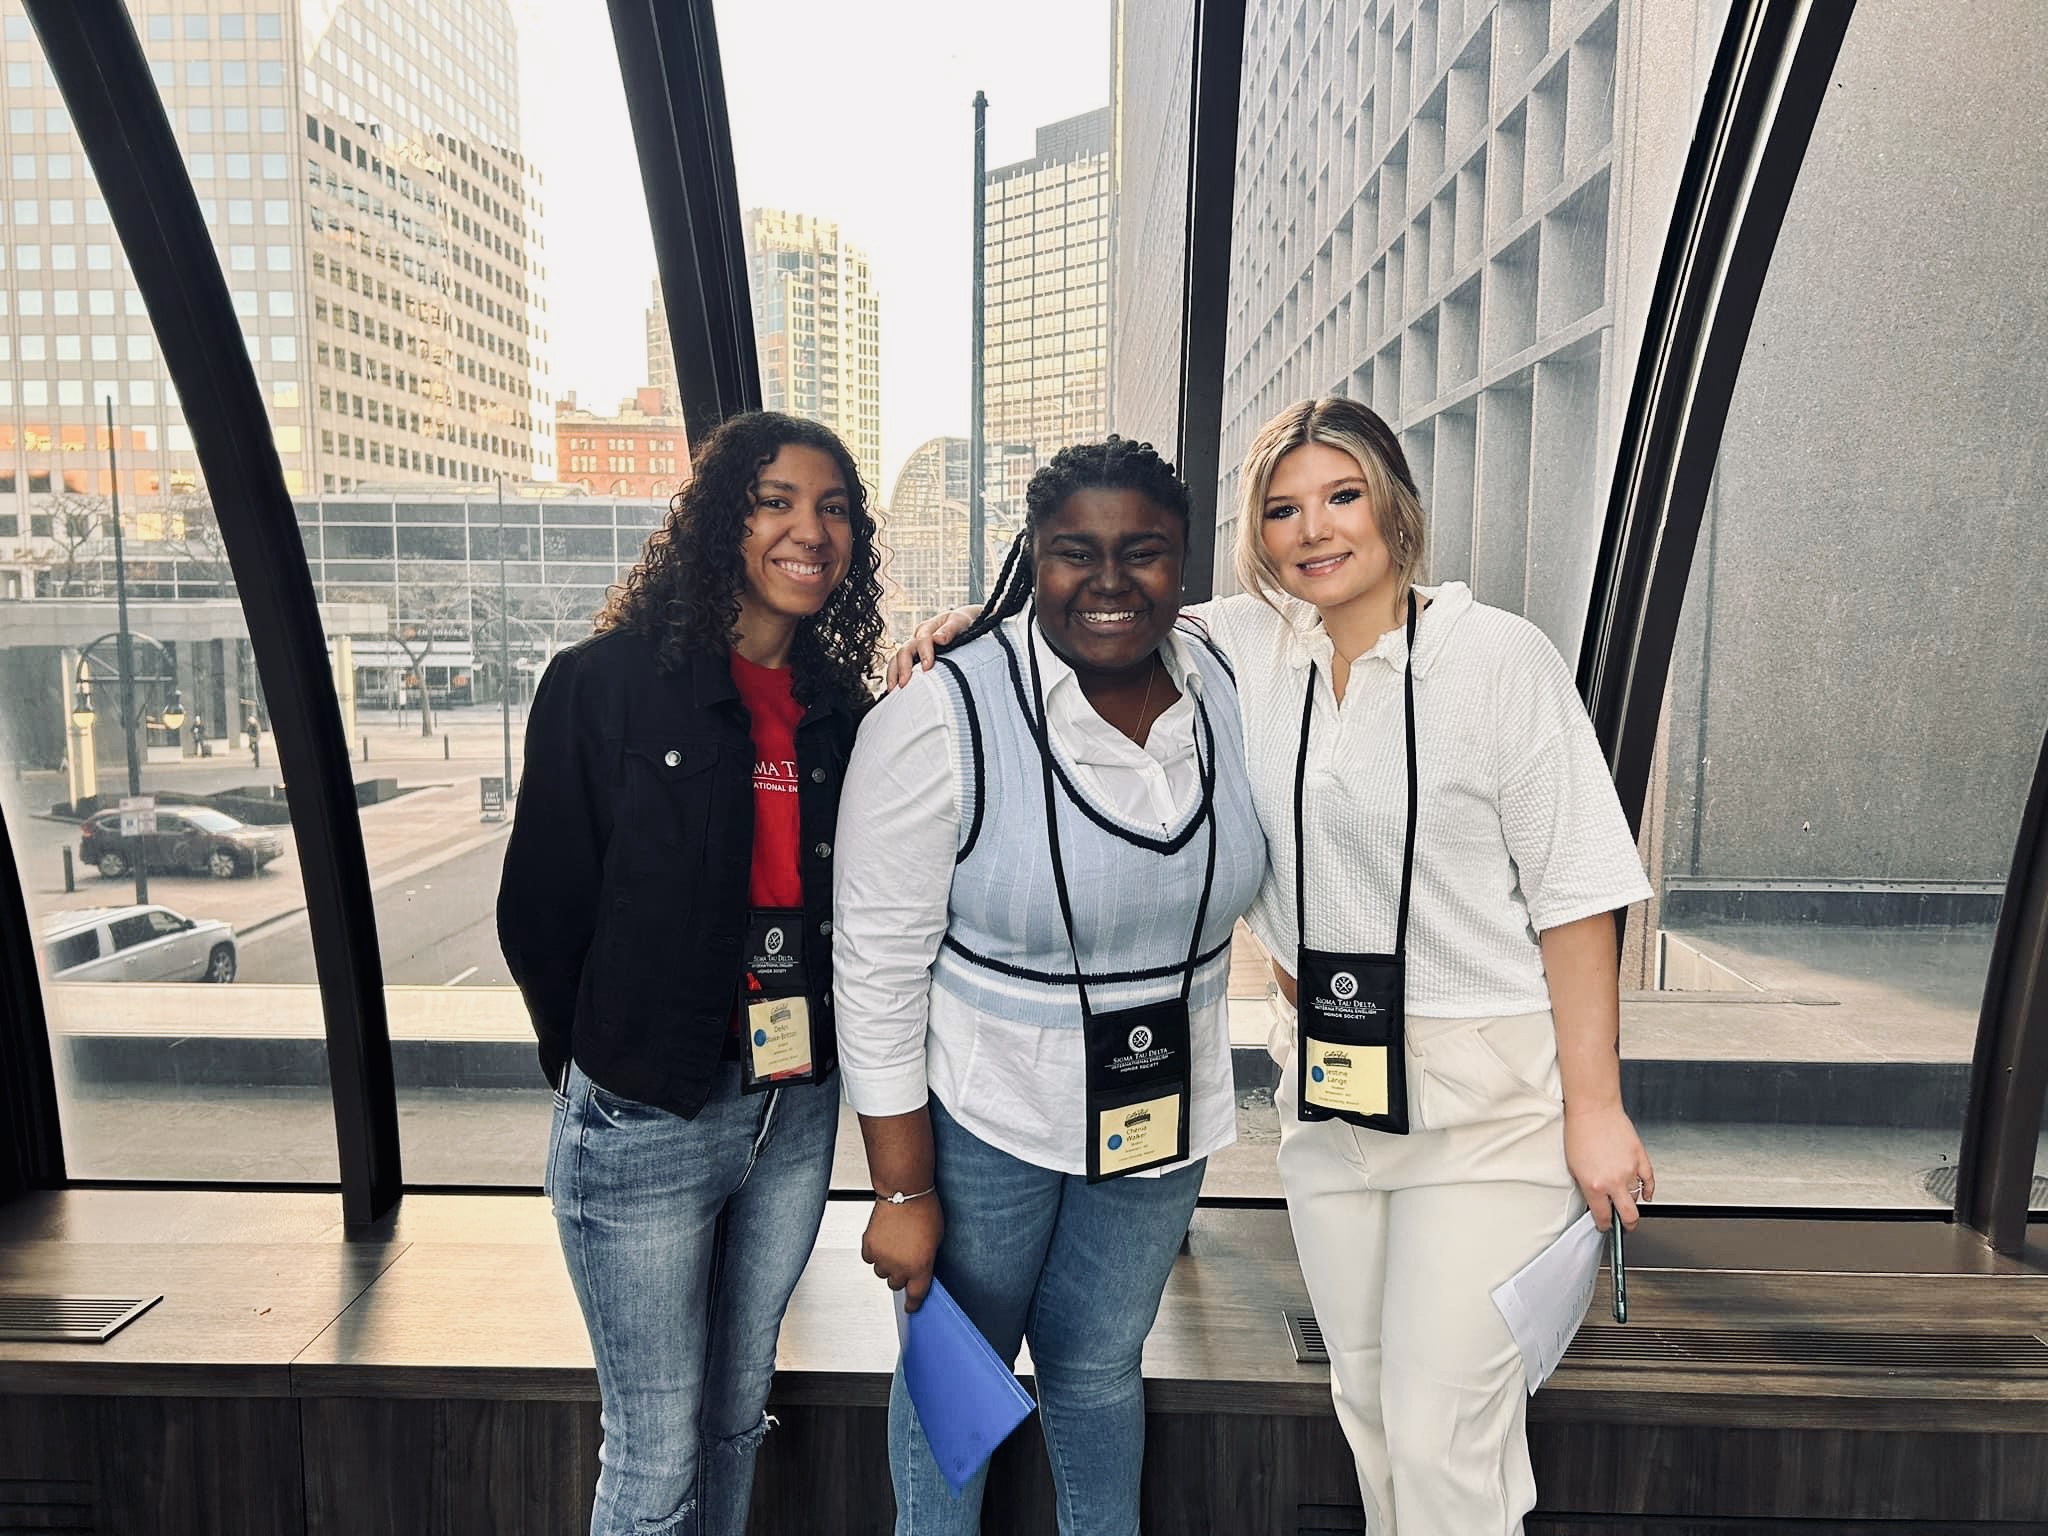 Lincoln University (LU) creative writing students traveled to Denver, Colorado, this spring to participate in the Sigma Tau Delta International English Honors Society annual convention.